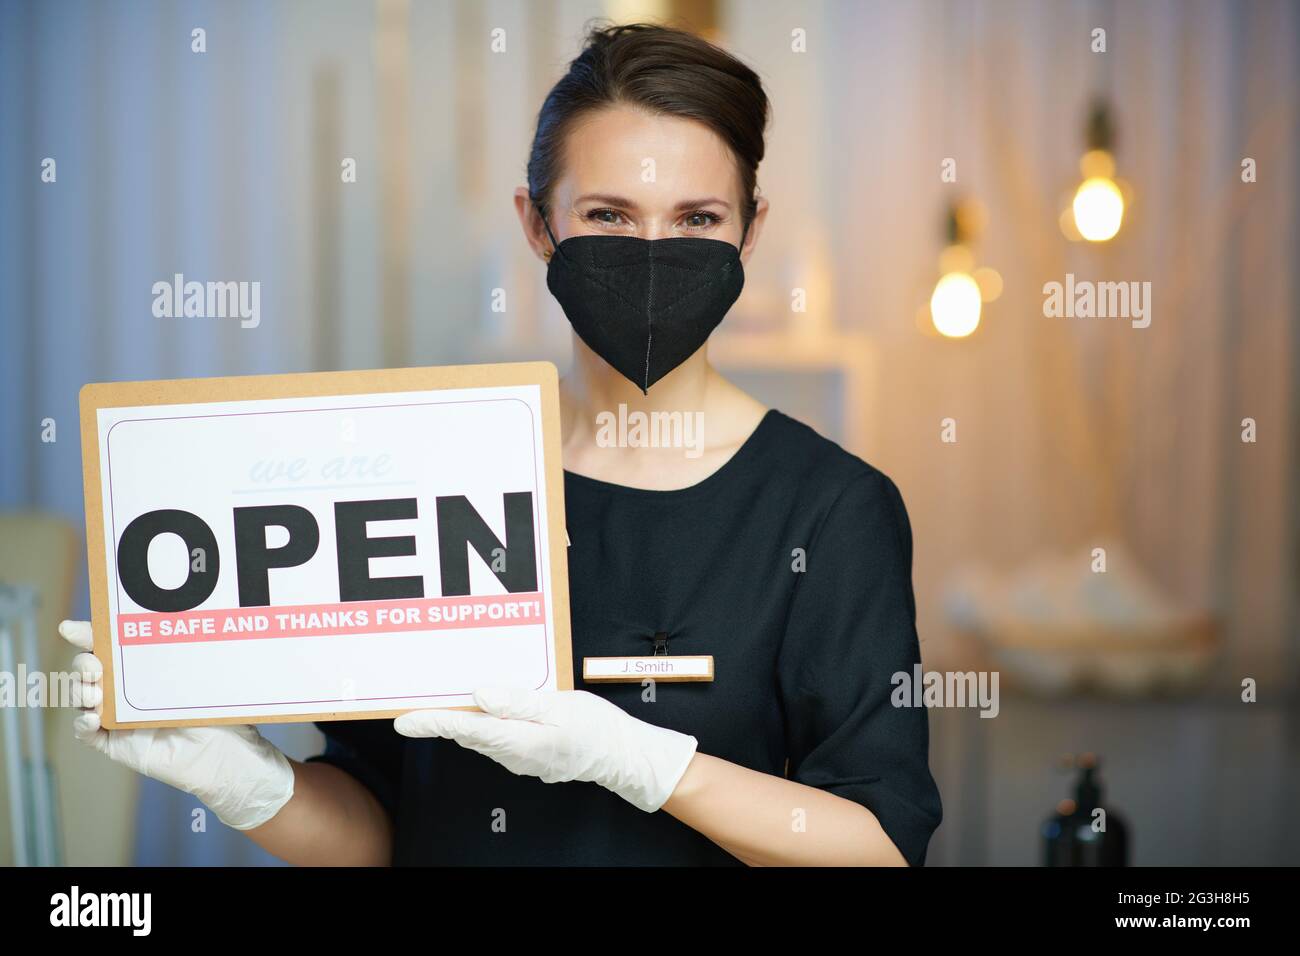 Business during covid-19 pandemic. Portrait of middle aged woman employee with ffp2 mask and open sign in modern beauty studio. Stock Photo